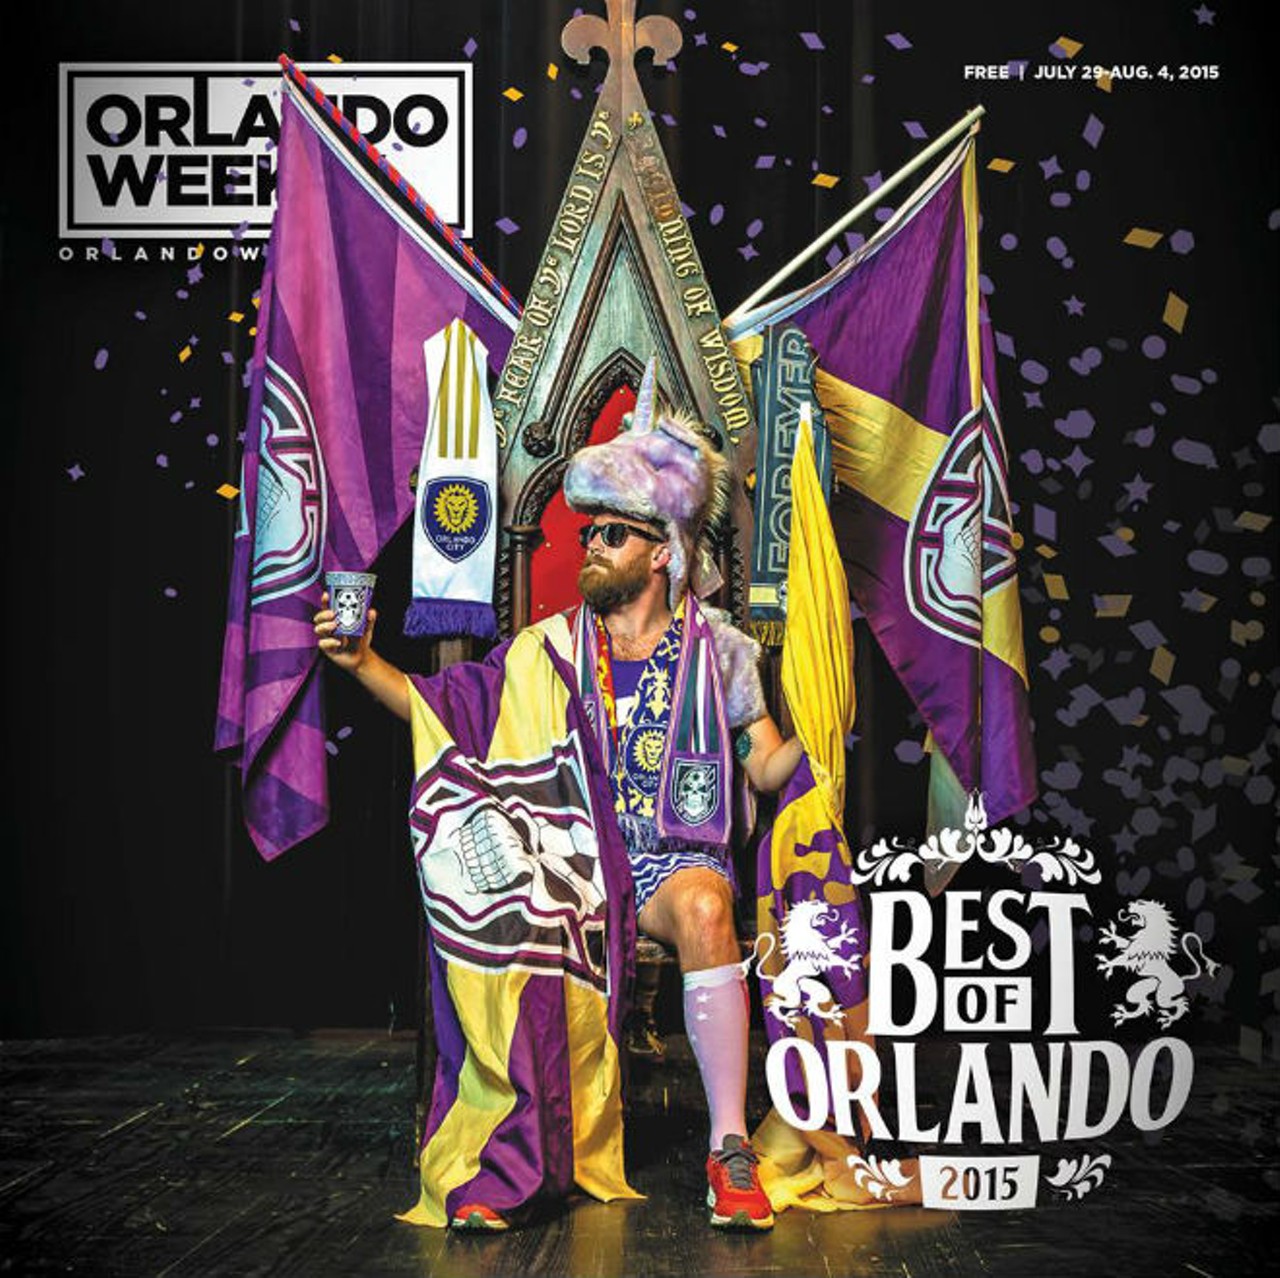 Best of Orlando 2015
Every single year, I always leave our annual Best of Orlando cover shoot mumbling &#147;holy shit, BEST SHOOT EVER&#148;: this year was no exception. Rob Bartlett&#146;s shot of Danny Voss (a.k.a. &#147;Unicorn Guy&#148;), unsung fan-mascot of Orlando City Soccer, was pure gold. It took a little convincing to get our publisher behind the massive amounts of empty space on the sides, but that&#146;s a huge part of my job: getting the world around me to see my vision, and help them decide if it&#146;s the best course of action for the company as a whole. Very proud of this one.